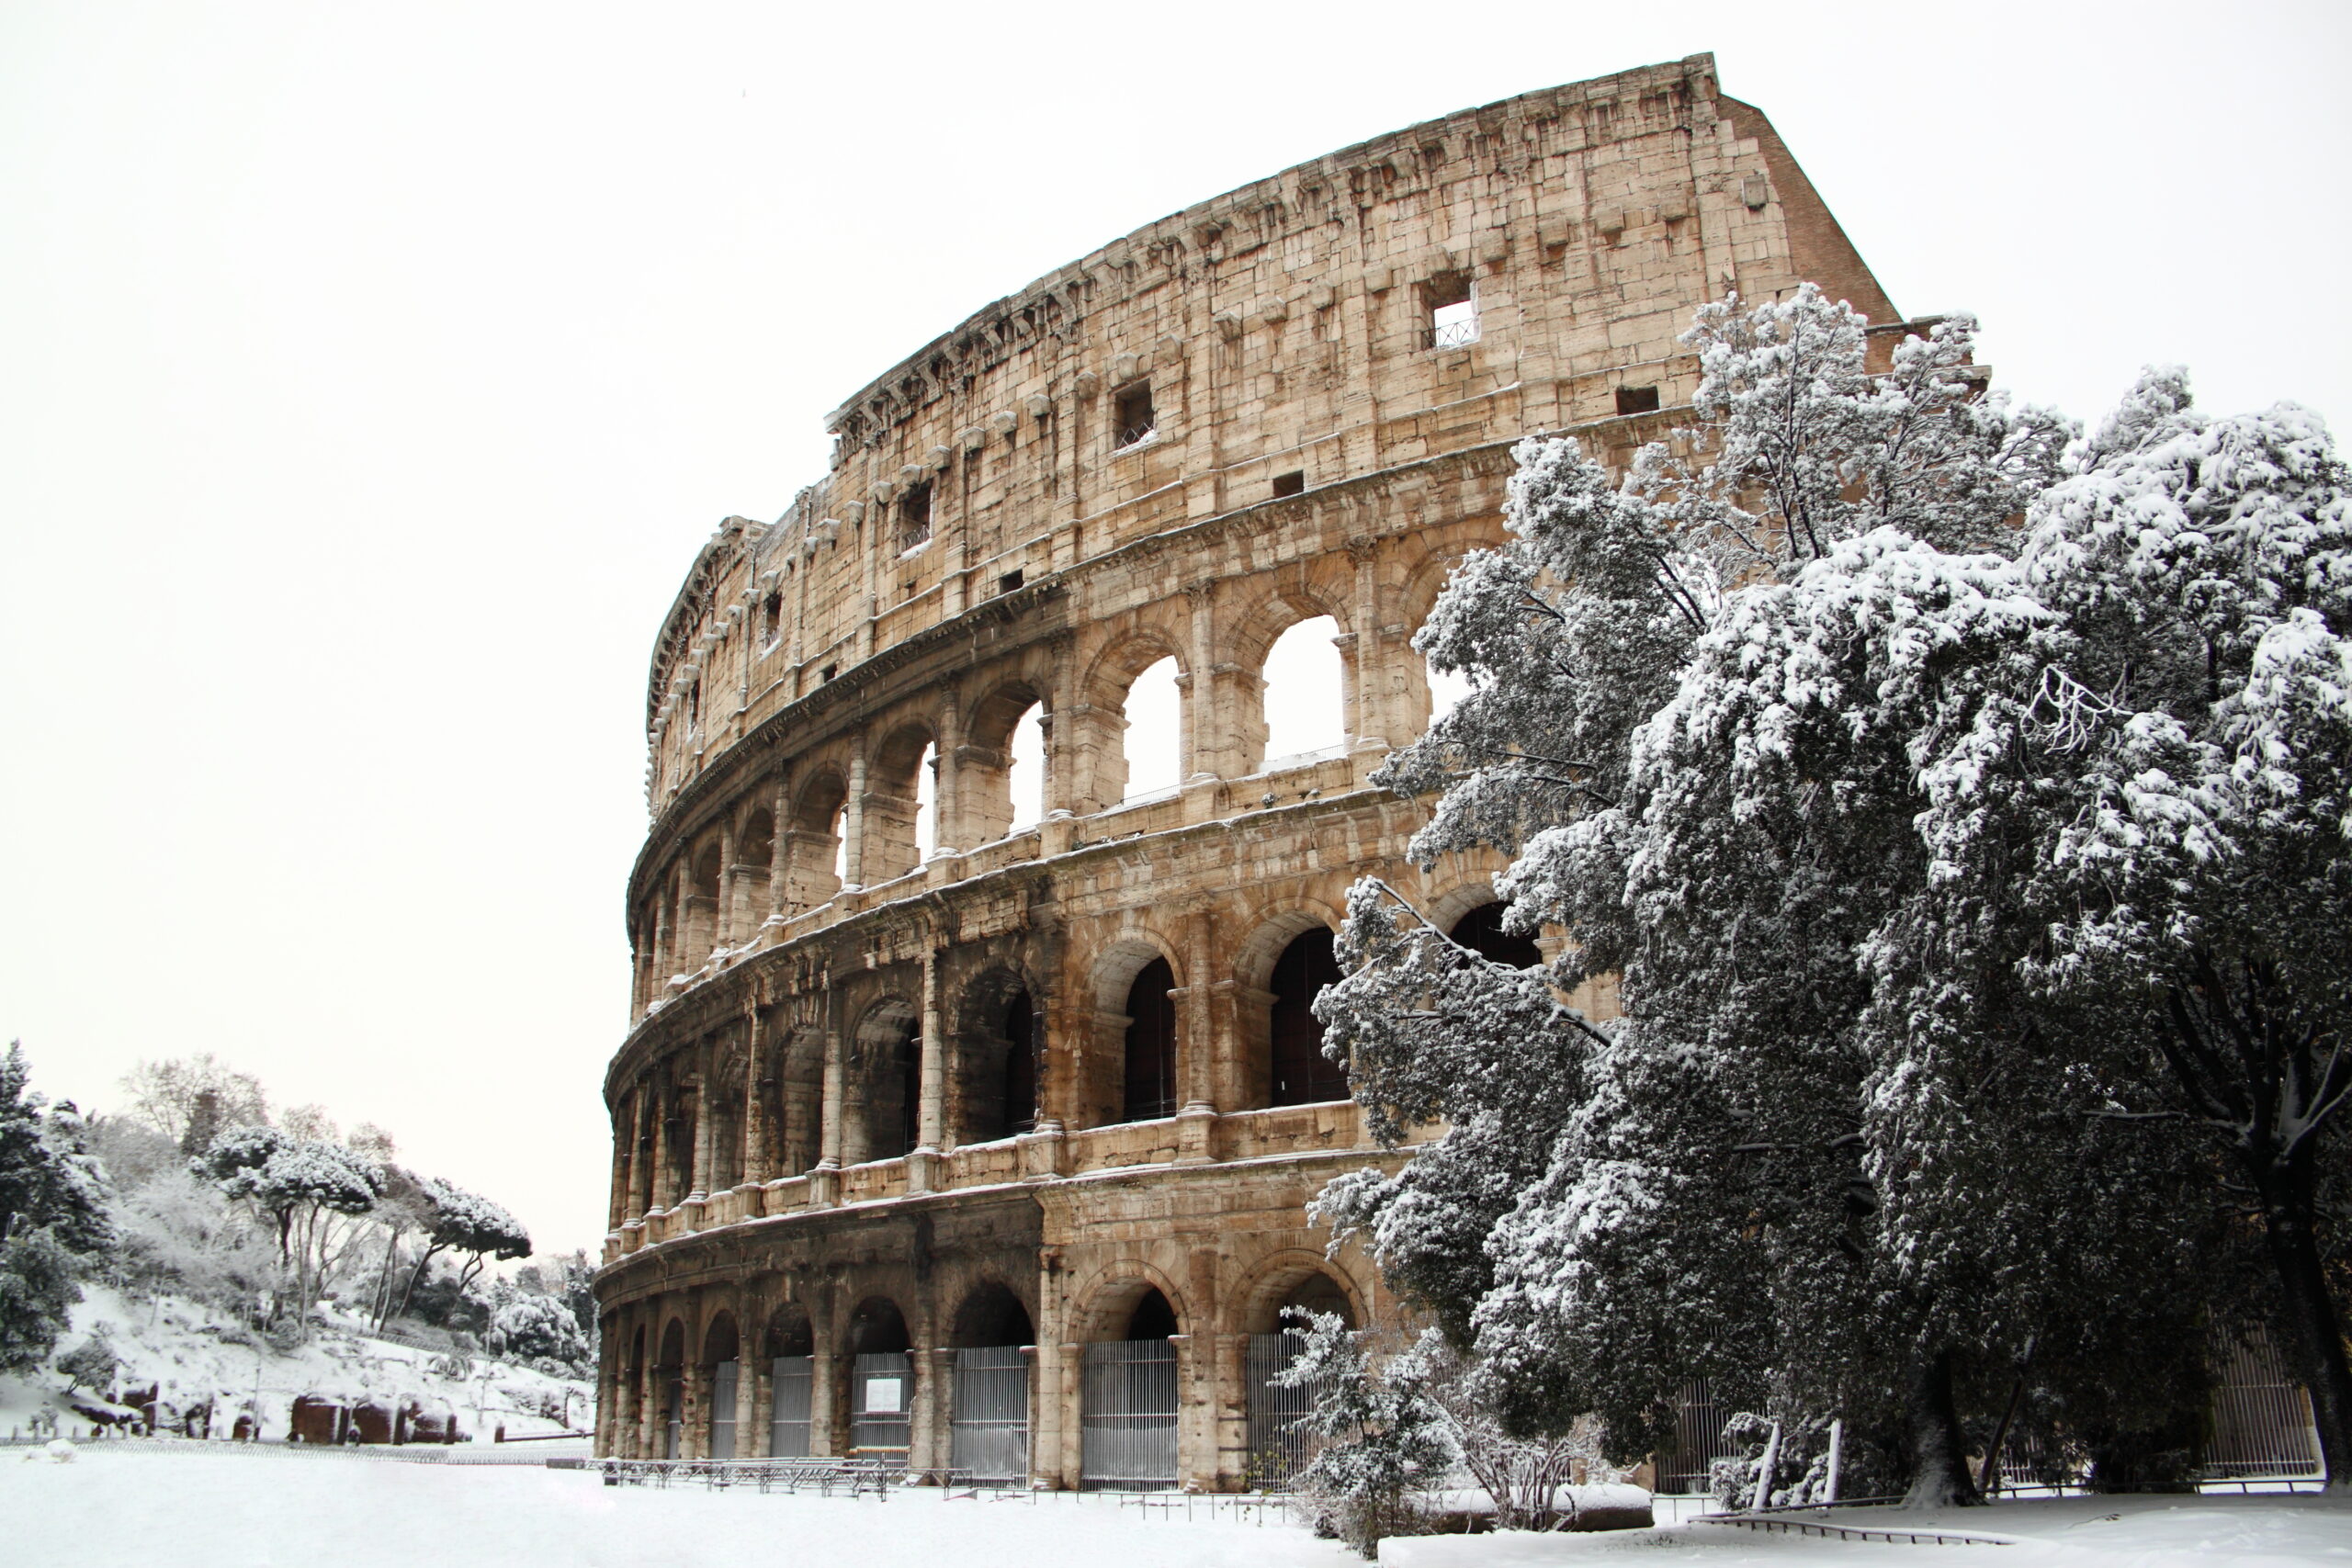 View of the famous colosseum in Rome in the snow  